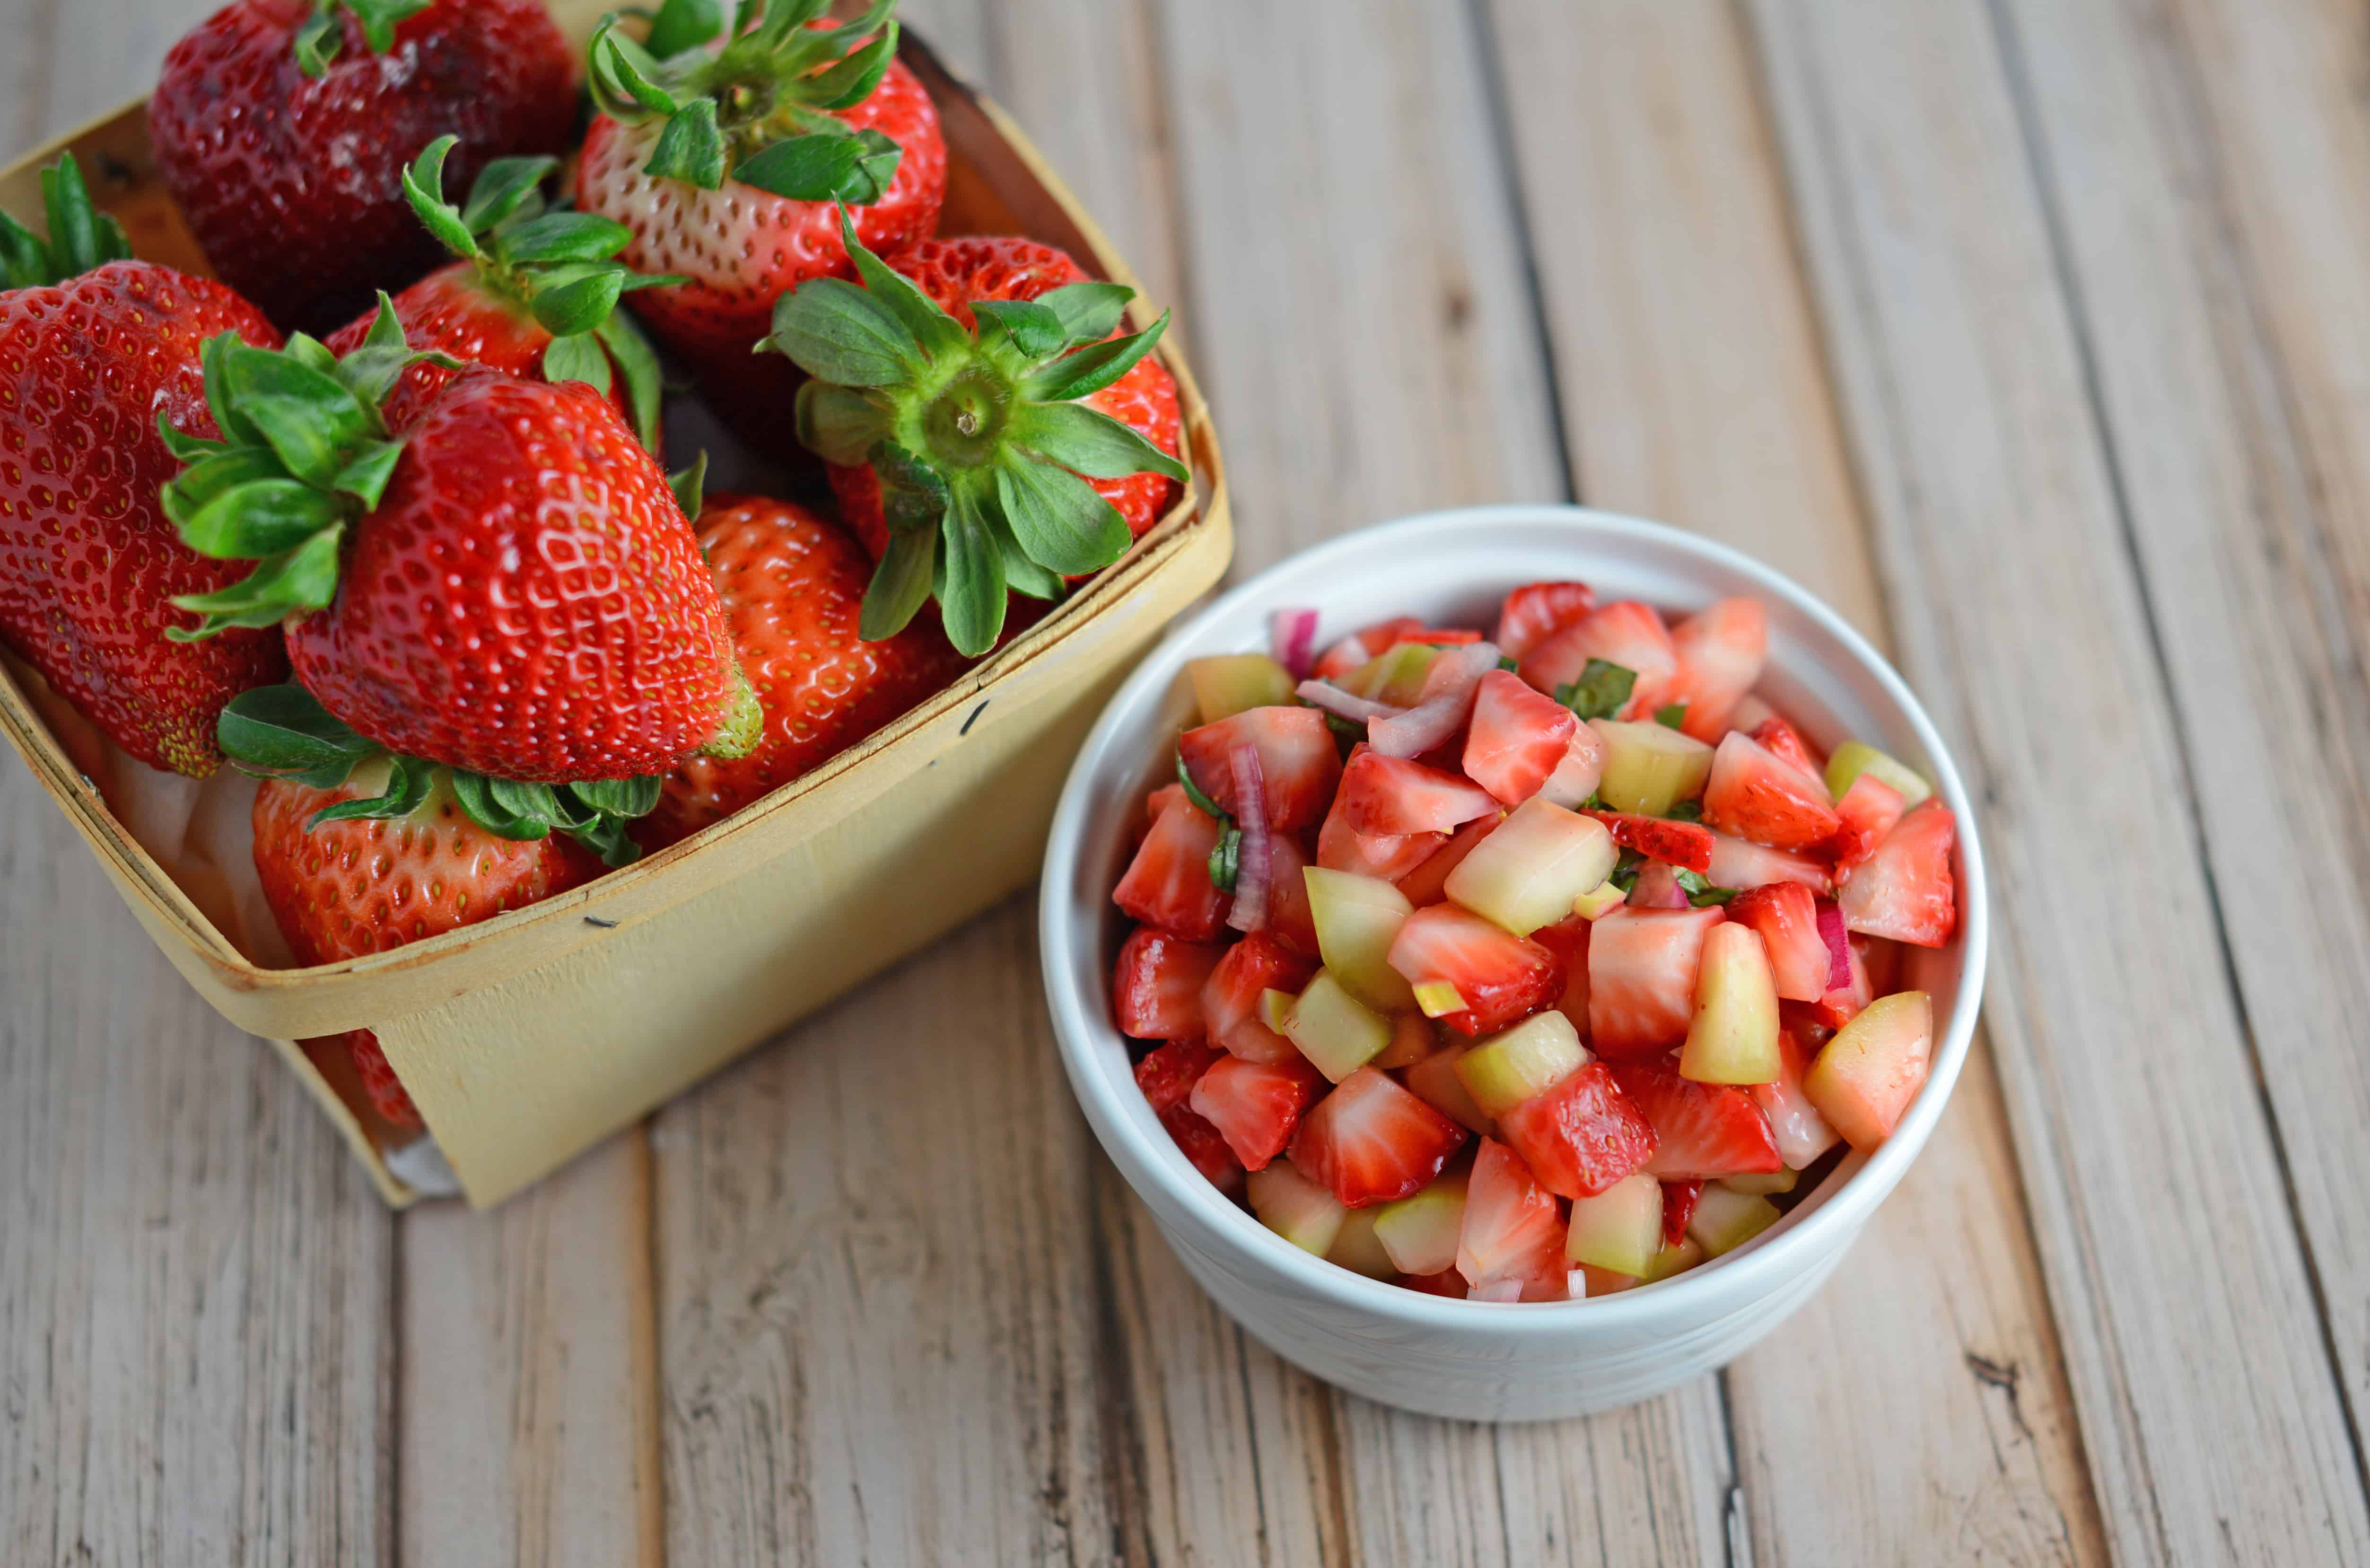 Strawberry Salsa Recipe- only 6 ingredients for this zingy and sweet strawberry salsa! Serve with cinnamon and sugar pita chips, on ice cream, on top of a salad or with grilled salmon, chicken or shrimp. www.savoryexperiments.com